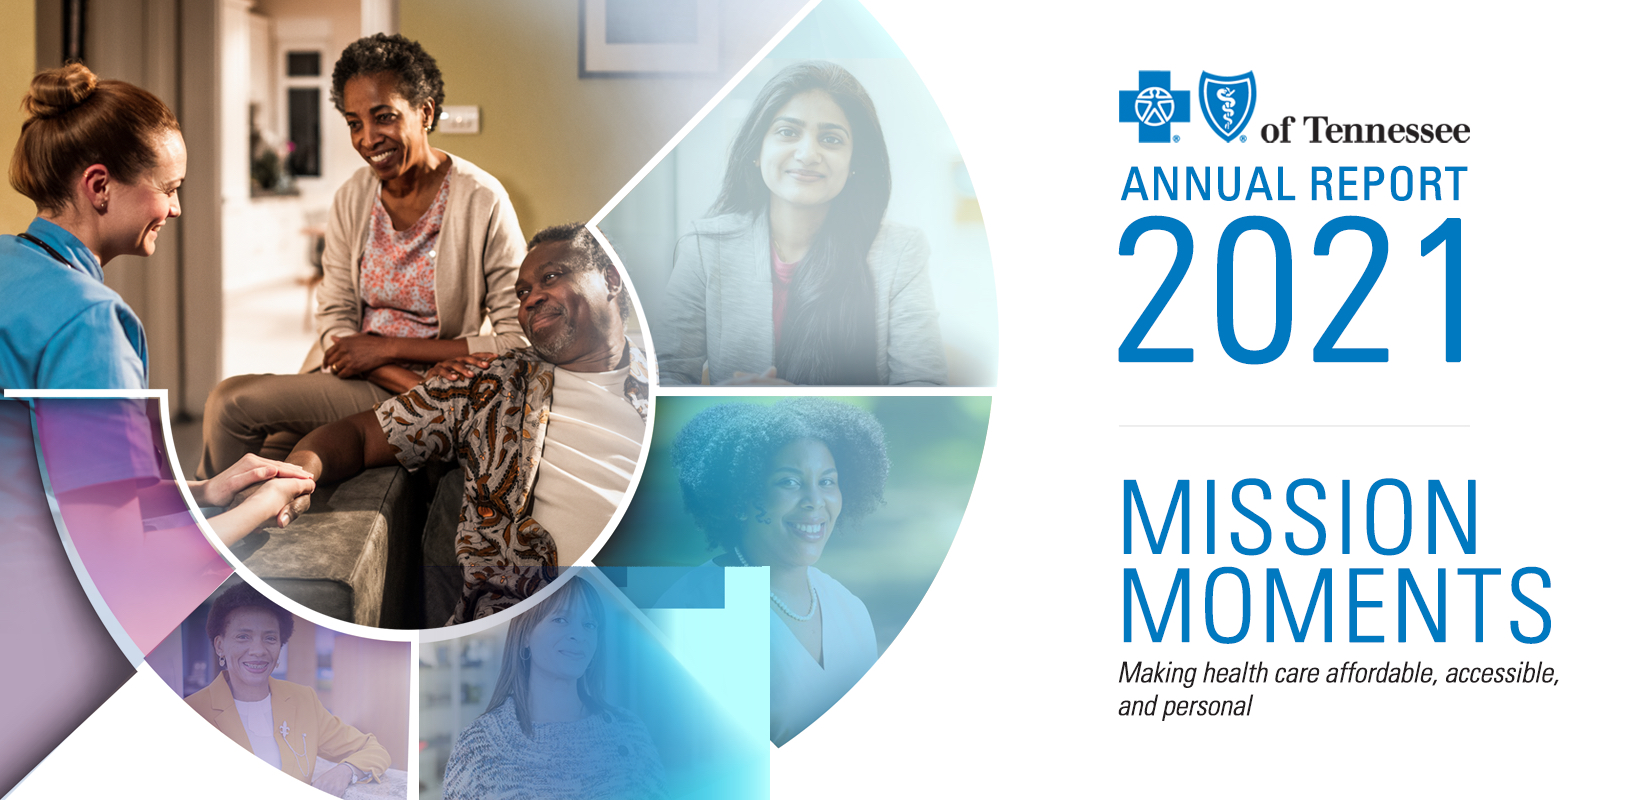 Annual Report Mission Moments Header image